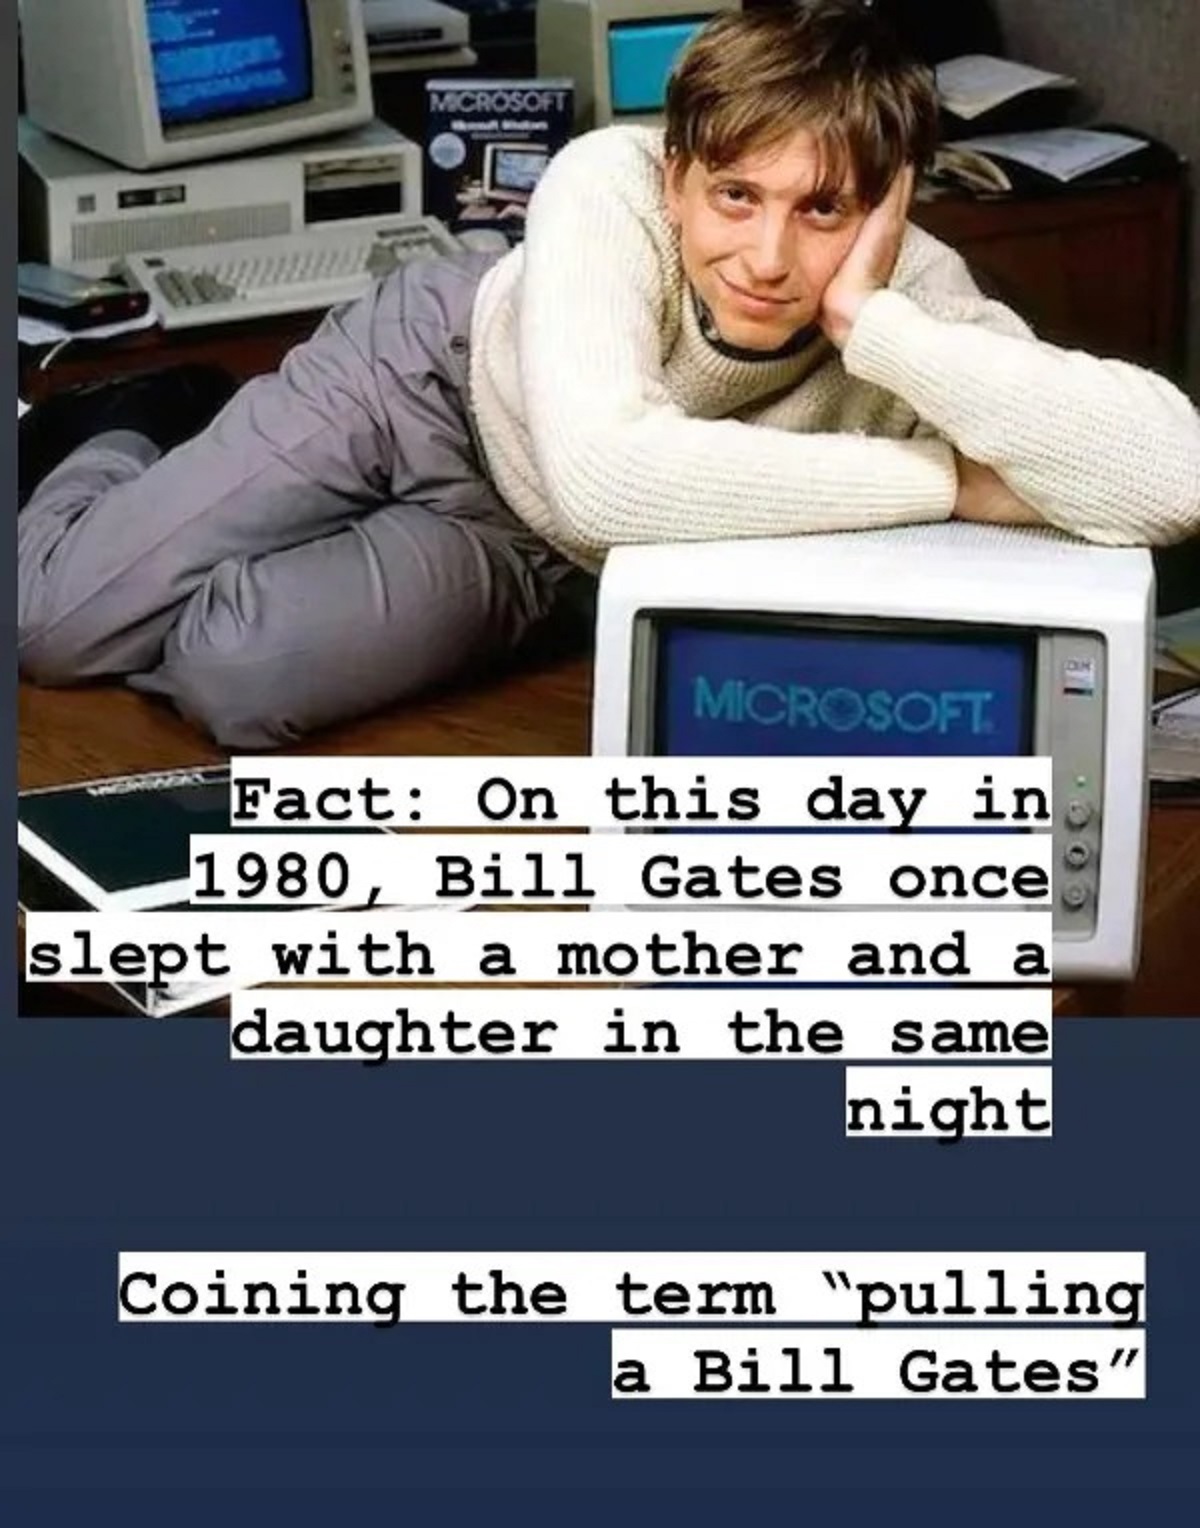 bill gates young - Microsoft Microsoft. Fact On this day in 1980, Bill Gates once slept with a mother and a daughter in the same night Coining the term "pulling a Bill Gates"